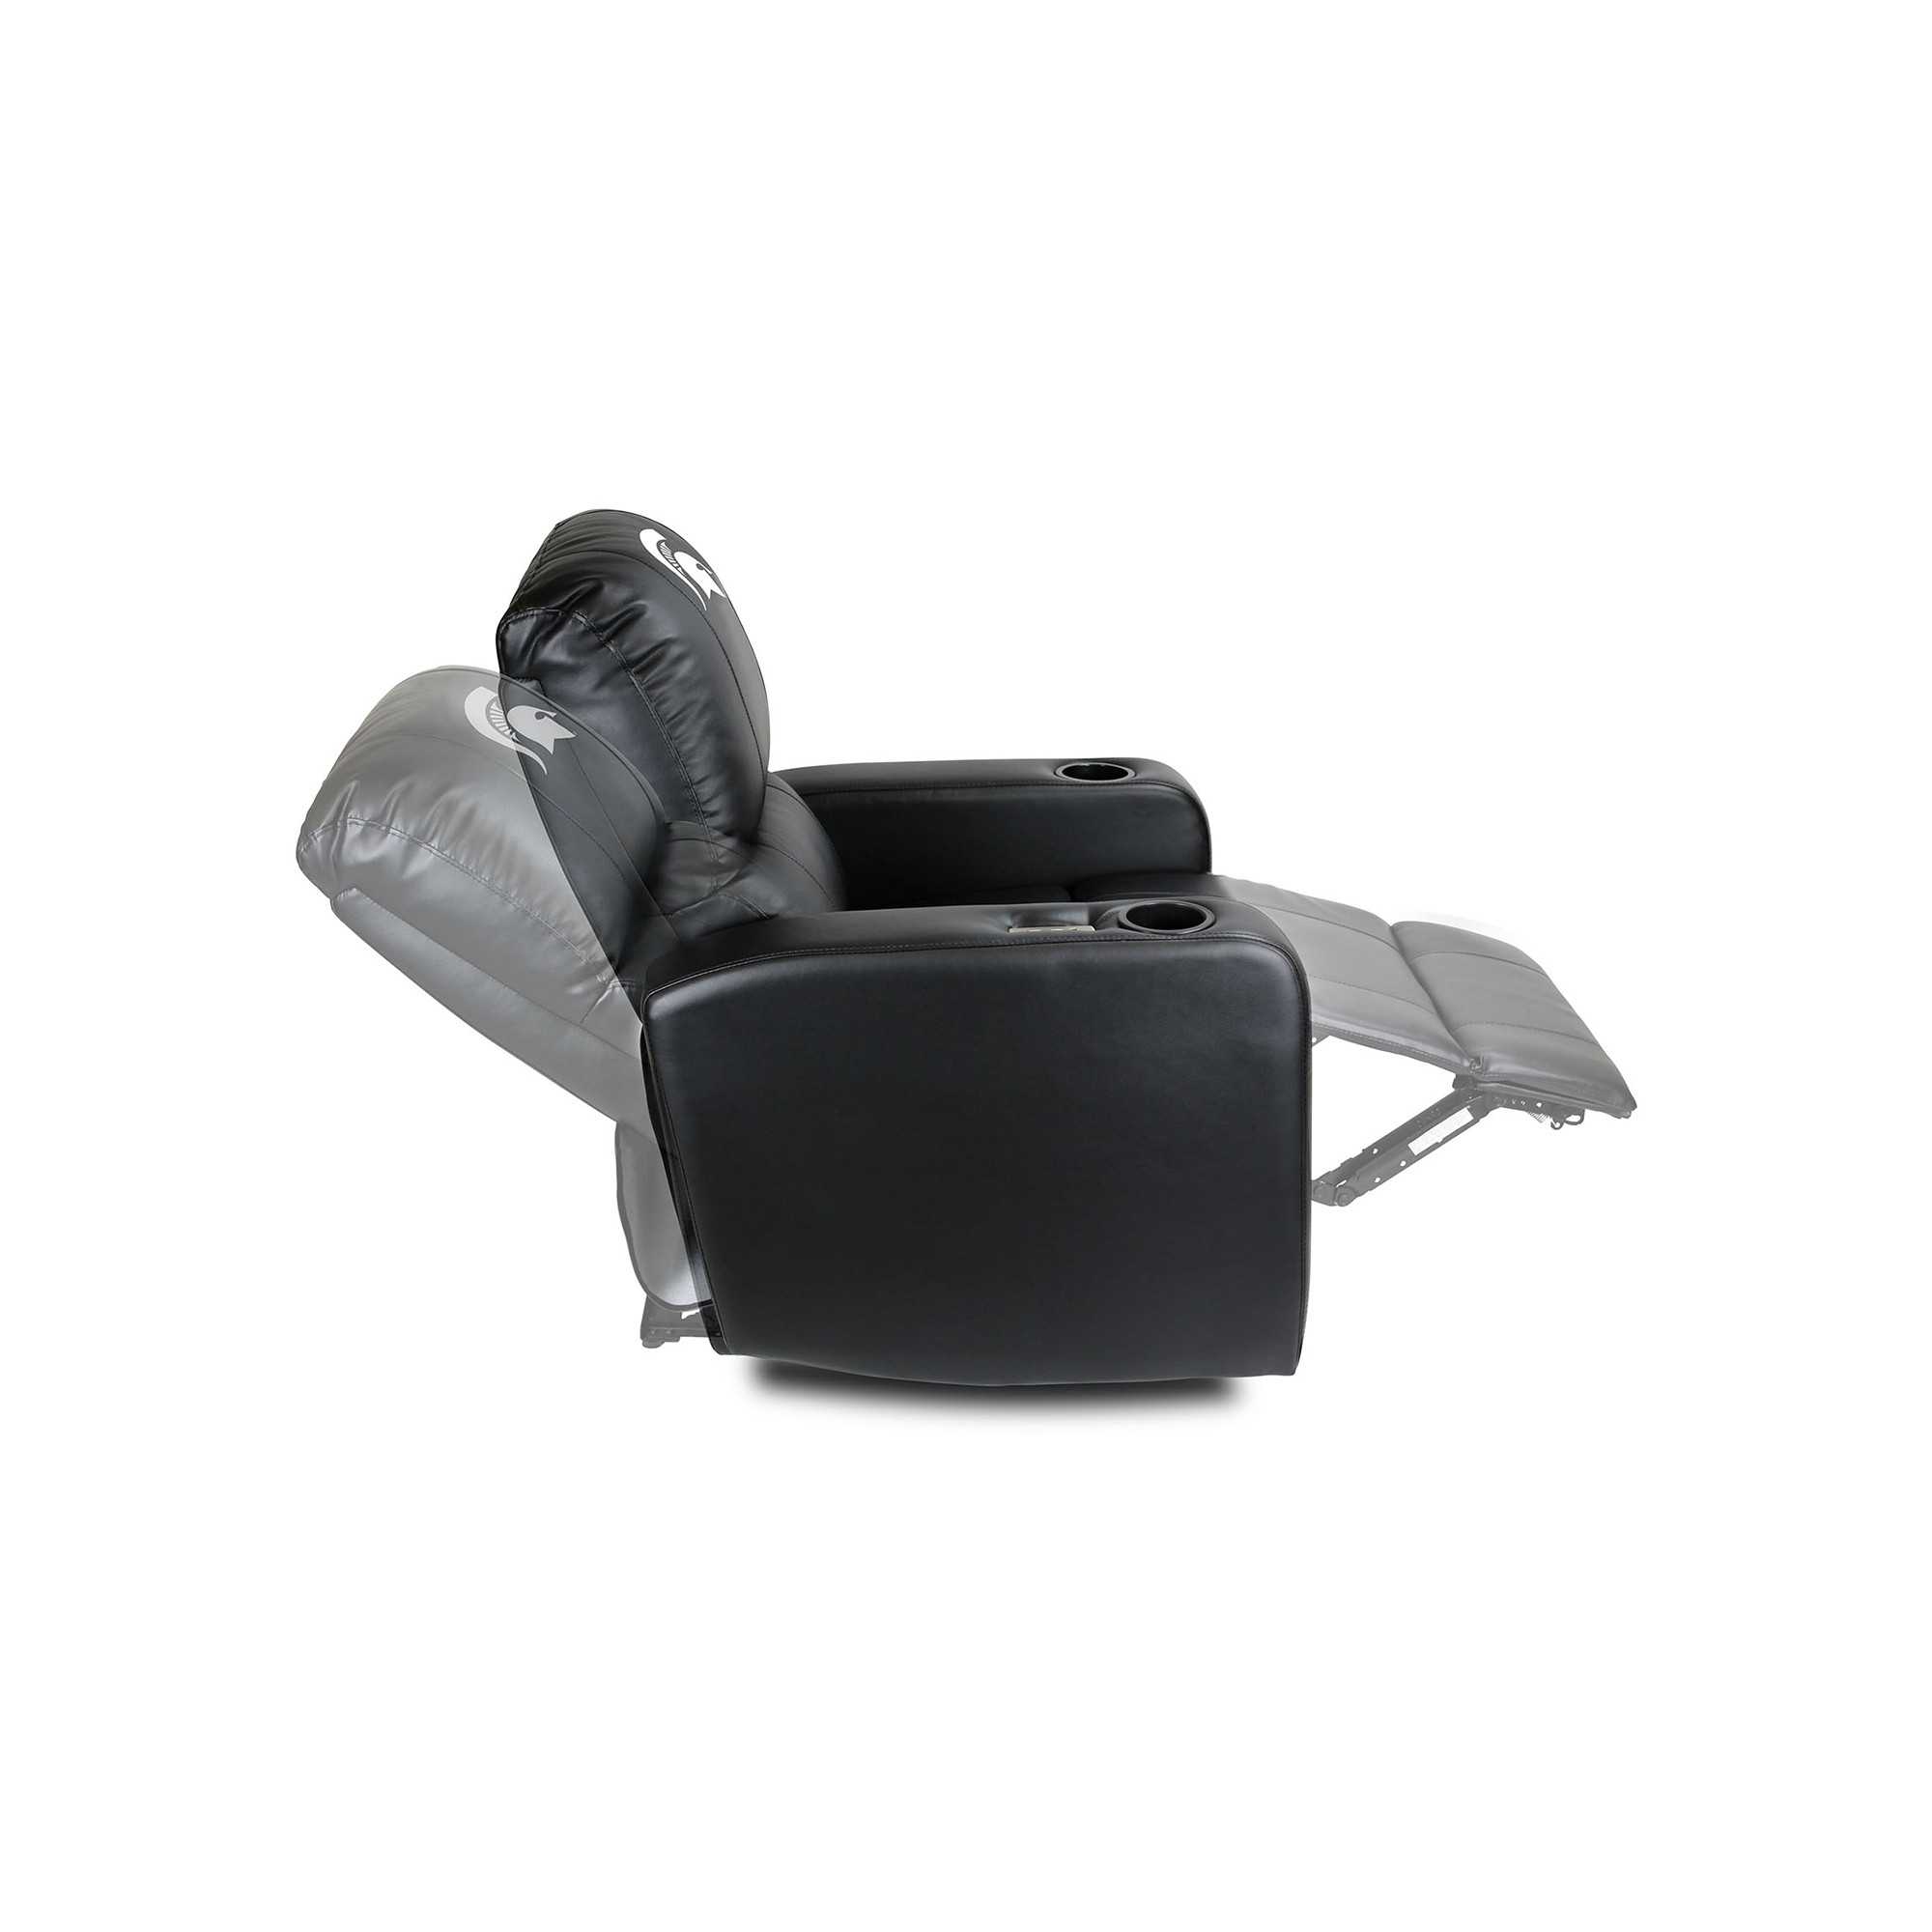 MICHIGAN STATE POWER THEATER RECLINER